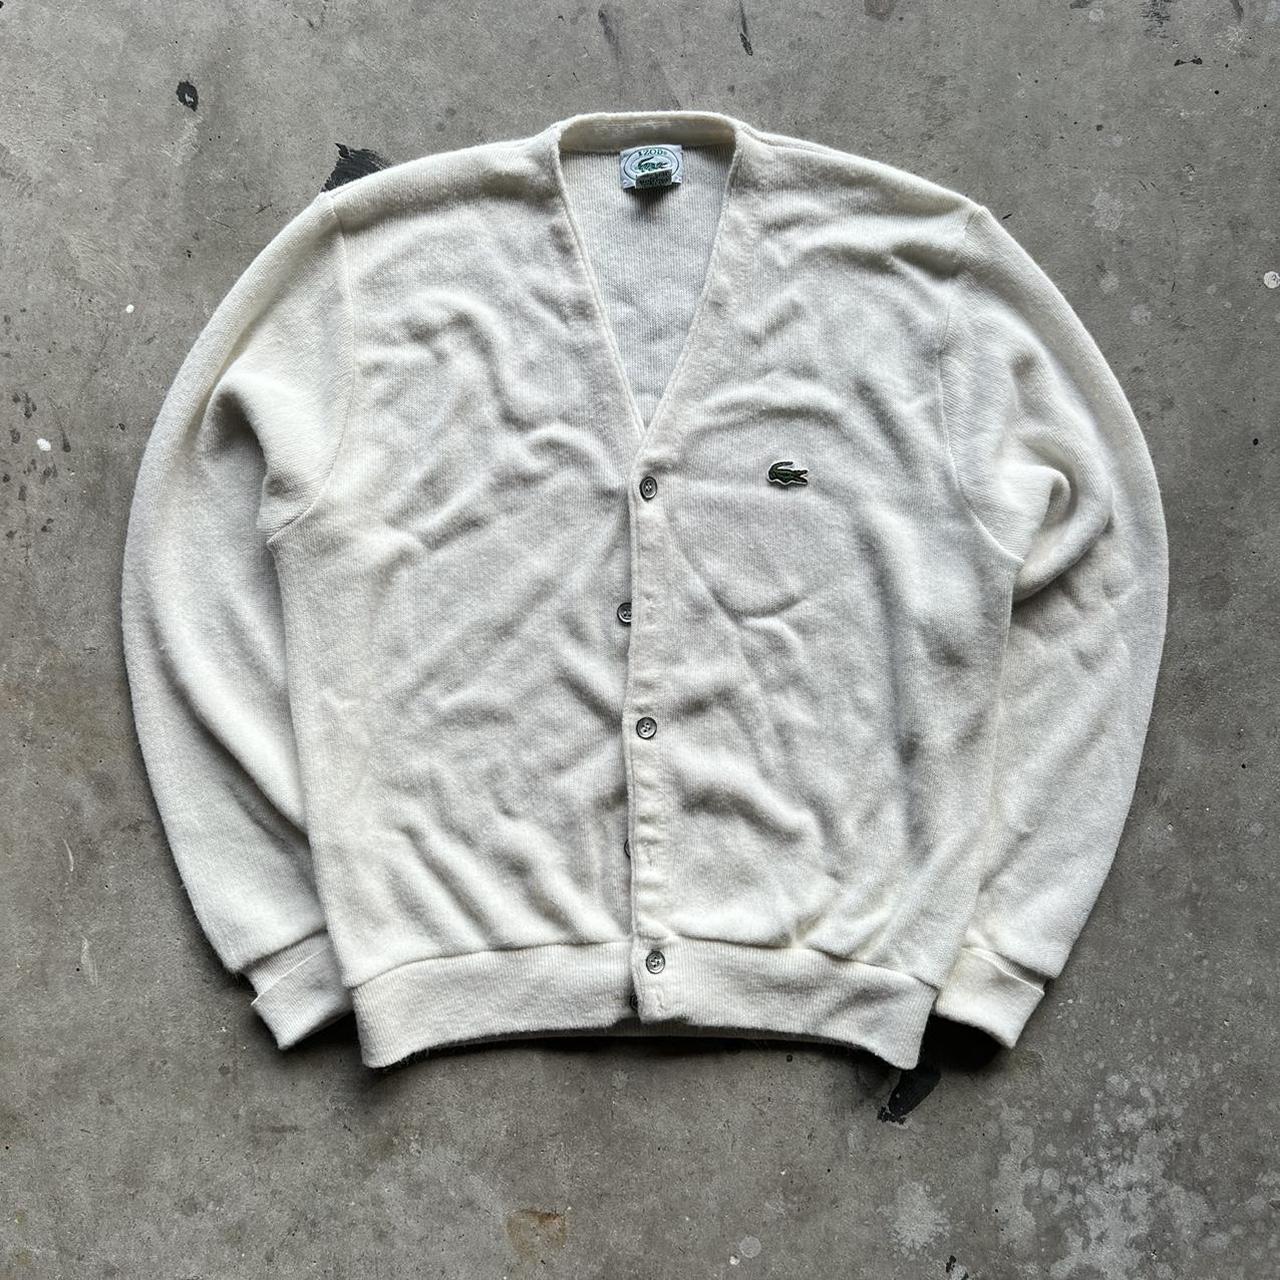 Product Image 1 - Vintage 90s Lacoste cream cardigan

chest: